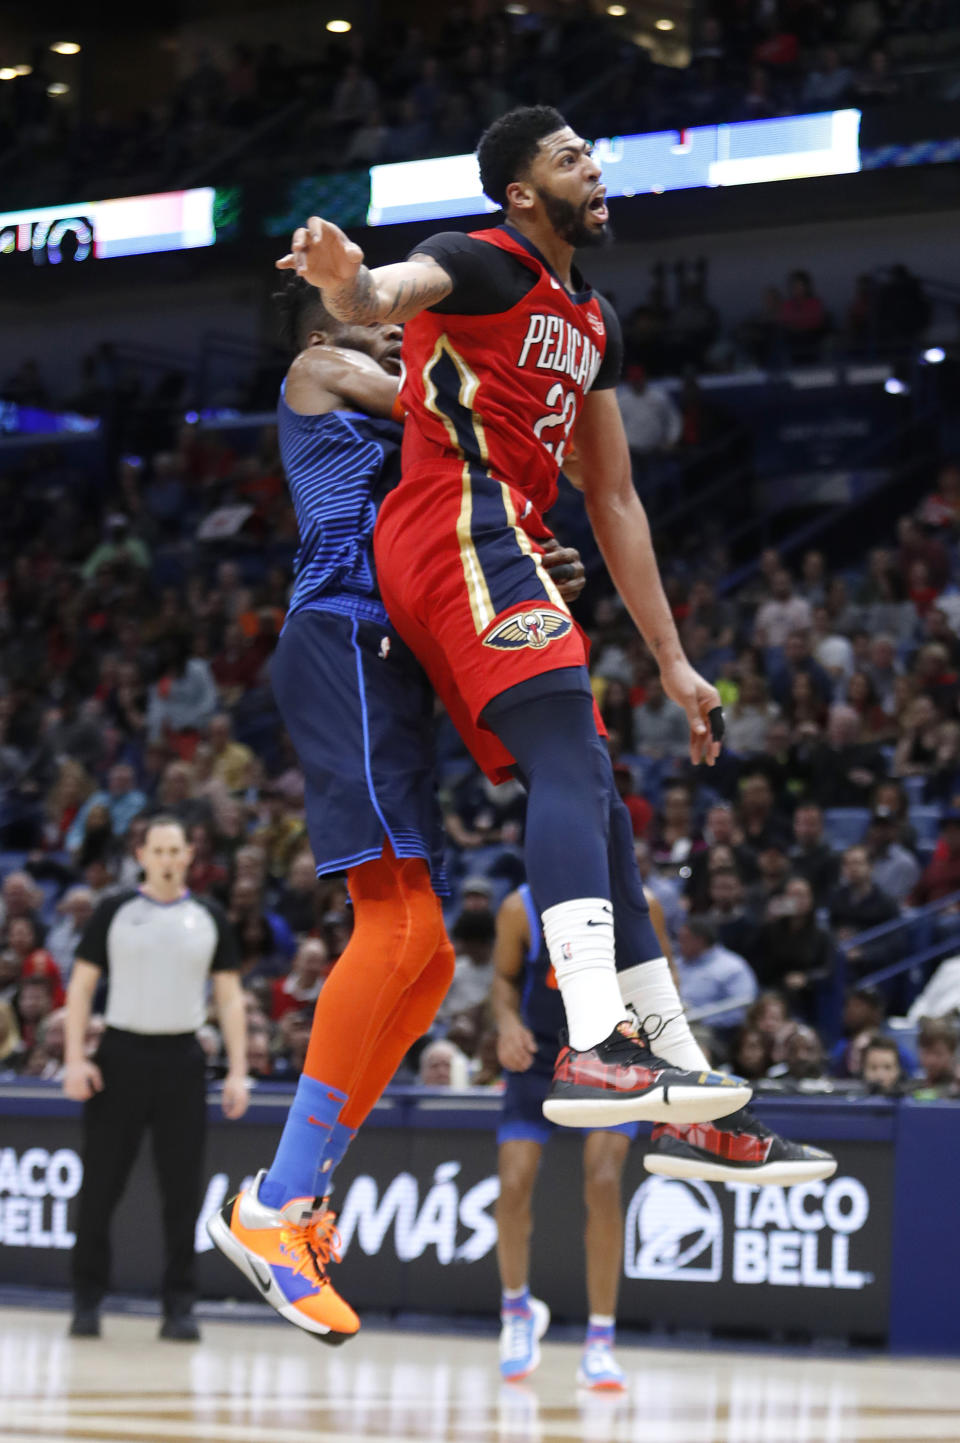 New Orleans Pelicans forward Anthony Davis (23) collides with Oklahoma City Thunder forward Nerlens Noel (3) after attempting to block a shot at the end of the first half of an NBA basketball game in New Orleans, Thursday, Feb. 14, 2019. Davis kept his left arm still as he walked to the locker room shortly after fouling Noel on an attempted shot block with his left hand. When the second half began, the Pelicans announced that Davis was out of the remainder of the game with a left shoulder injury, The Pelicans won 131-122. (AP Photo/Tyler Kaufman)